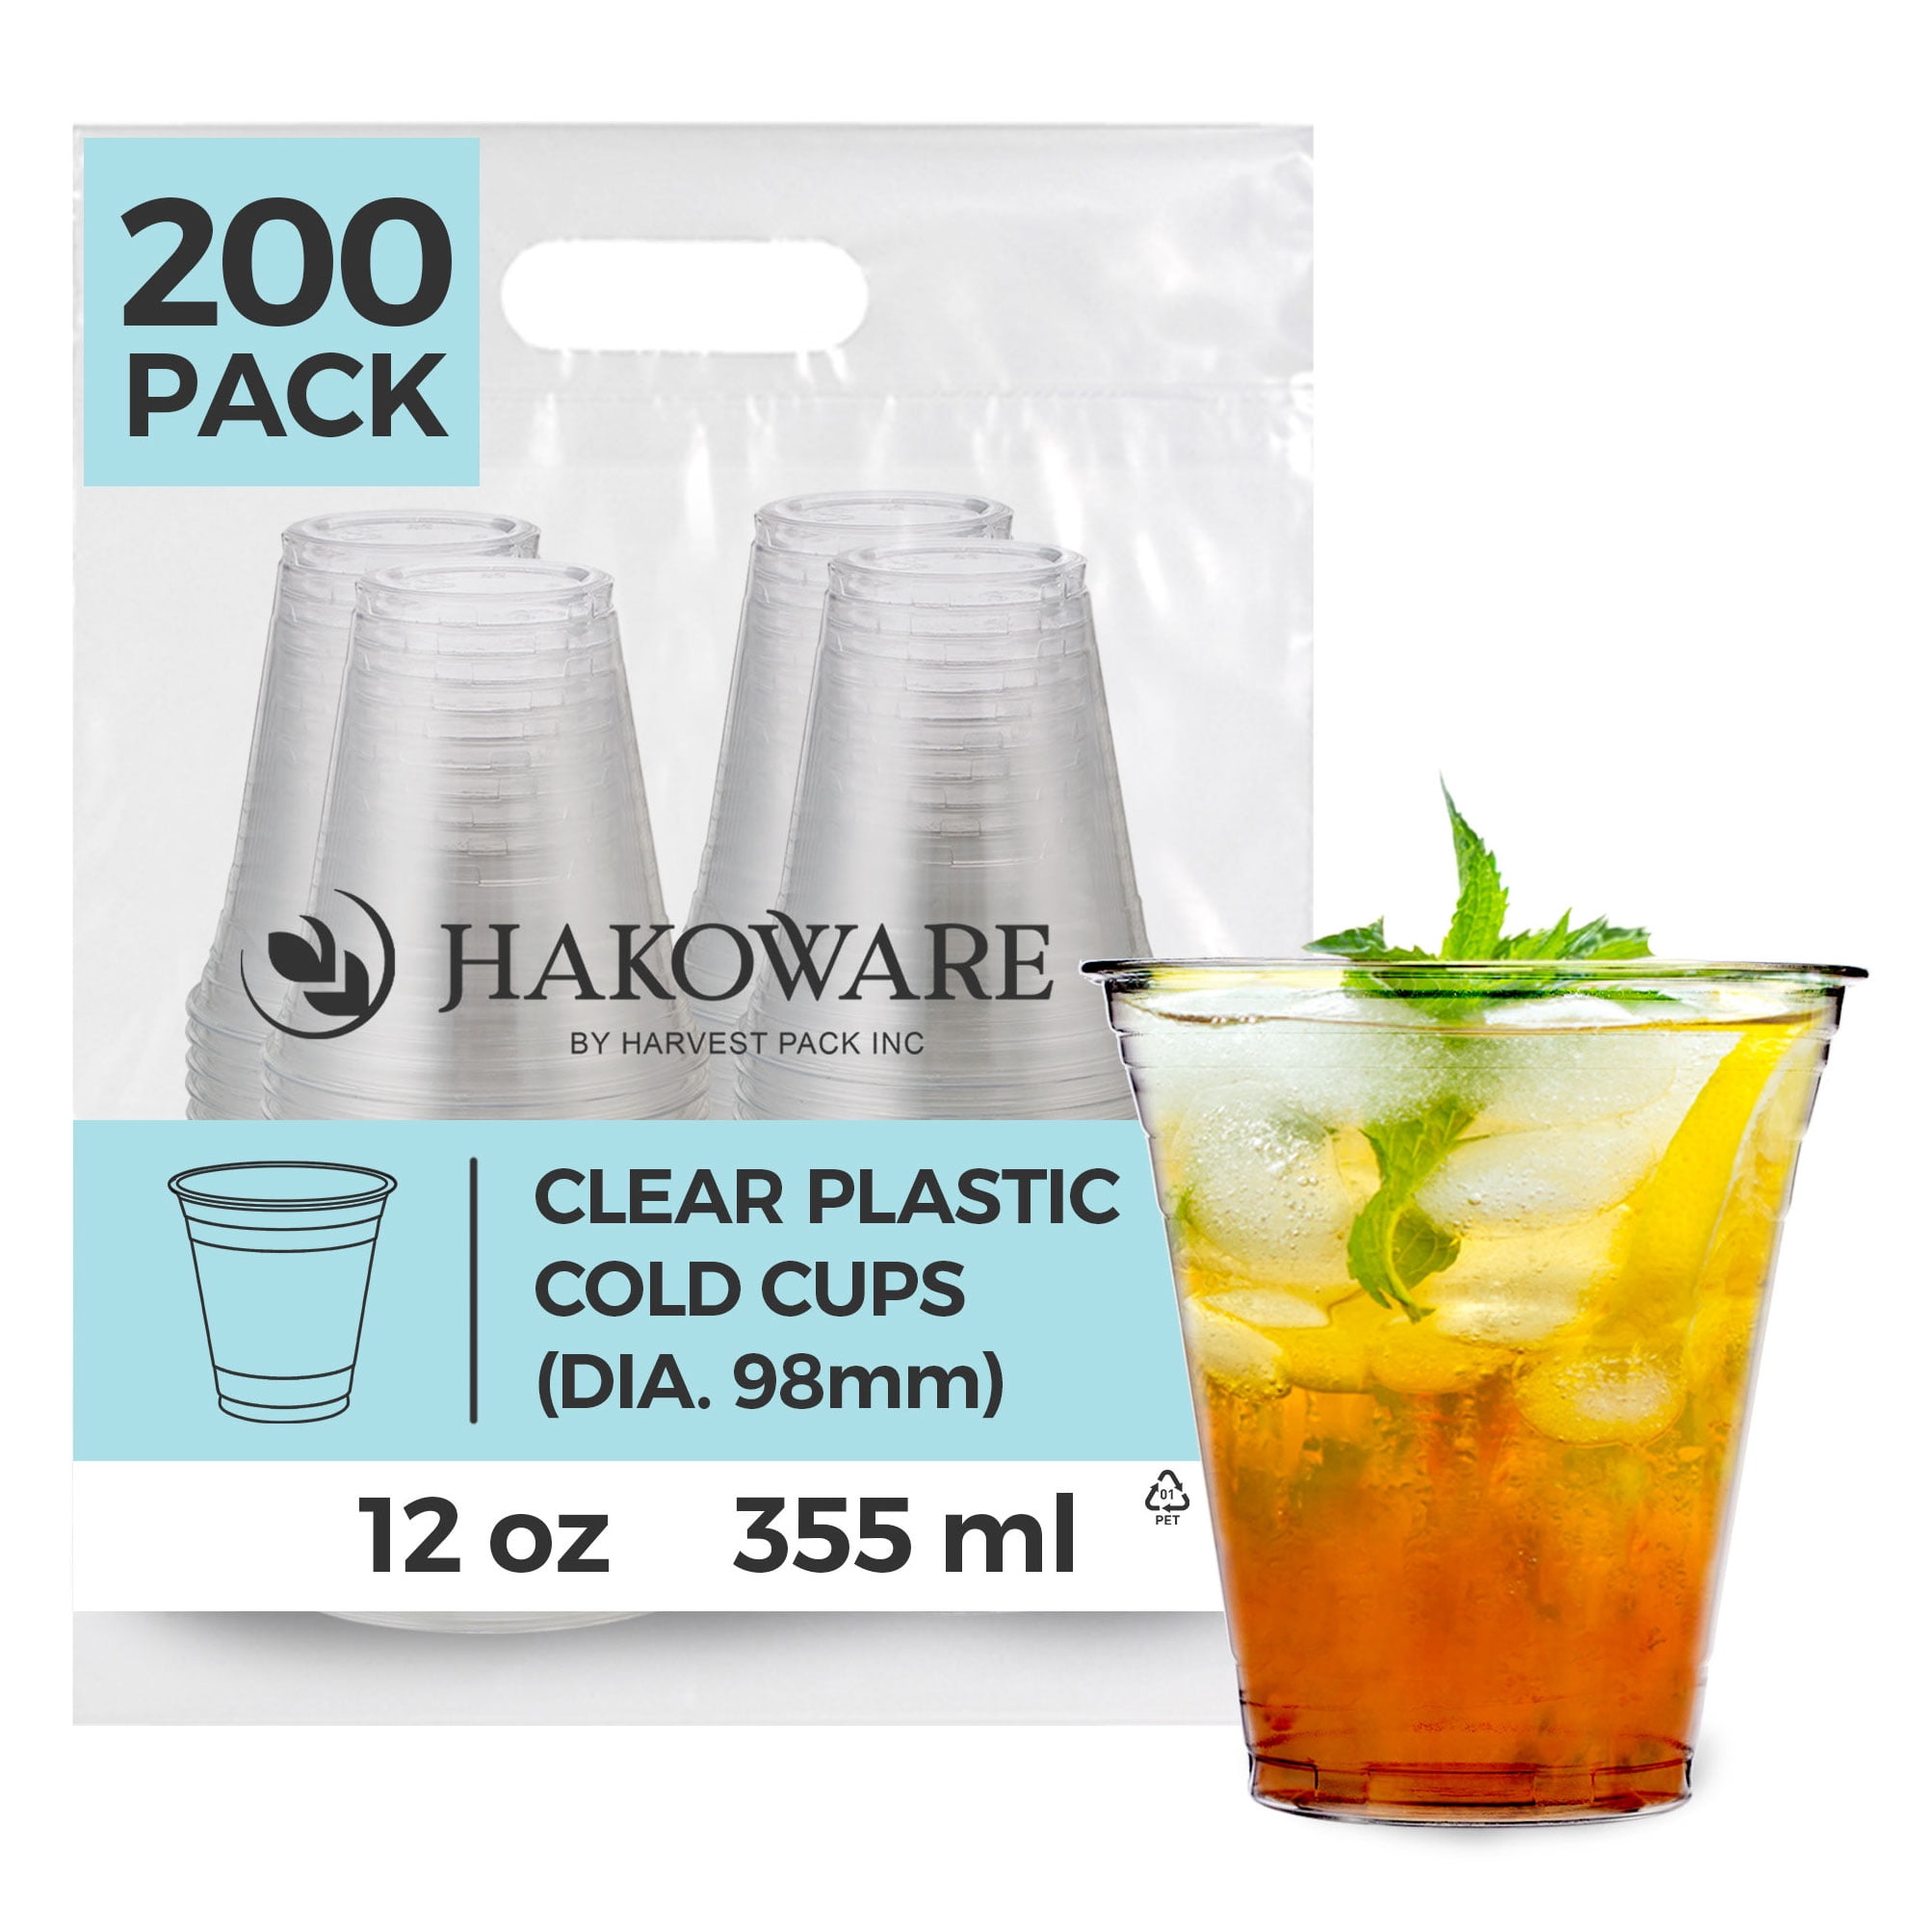 PERFECT SETTINGS 12 oz. 2-Line Gold Rim Clear Disposable Plastic Cups,  Party, Cold Drinks, (100/Pack) GOLD12OZ - The Home Depot